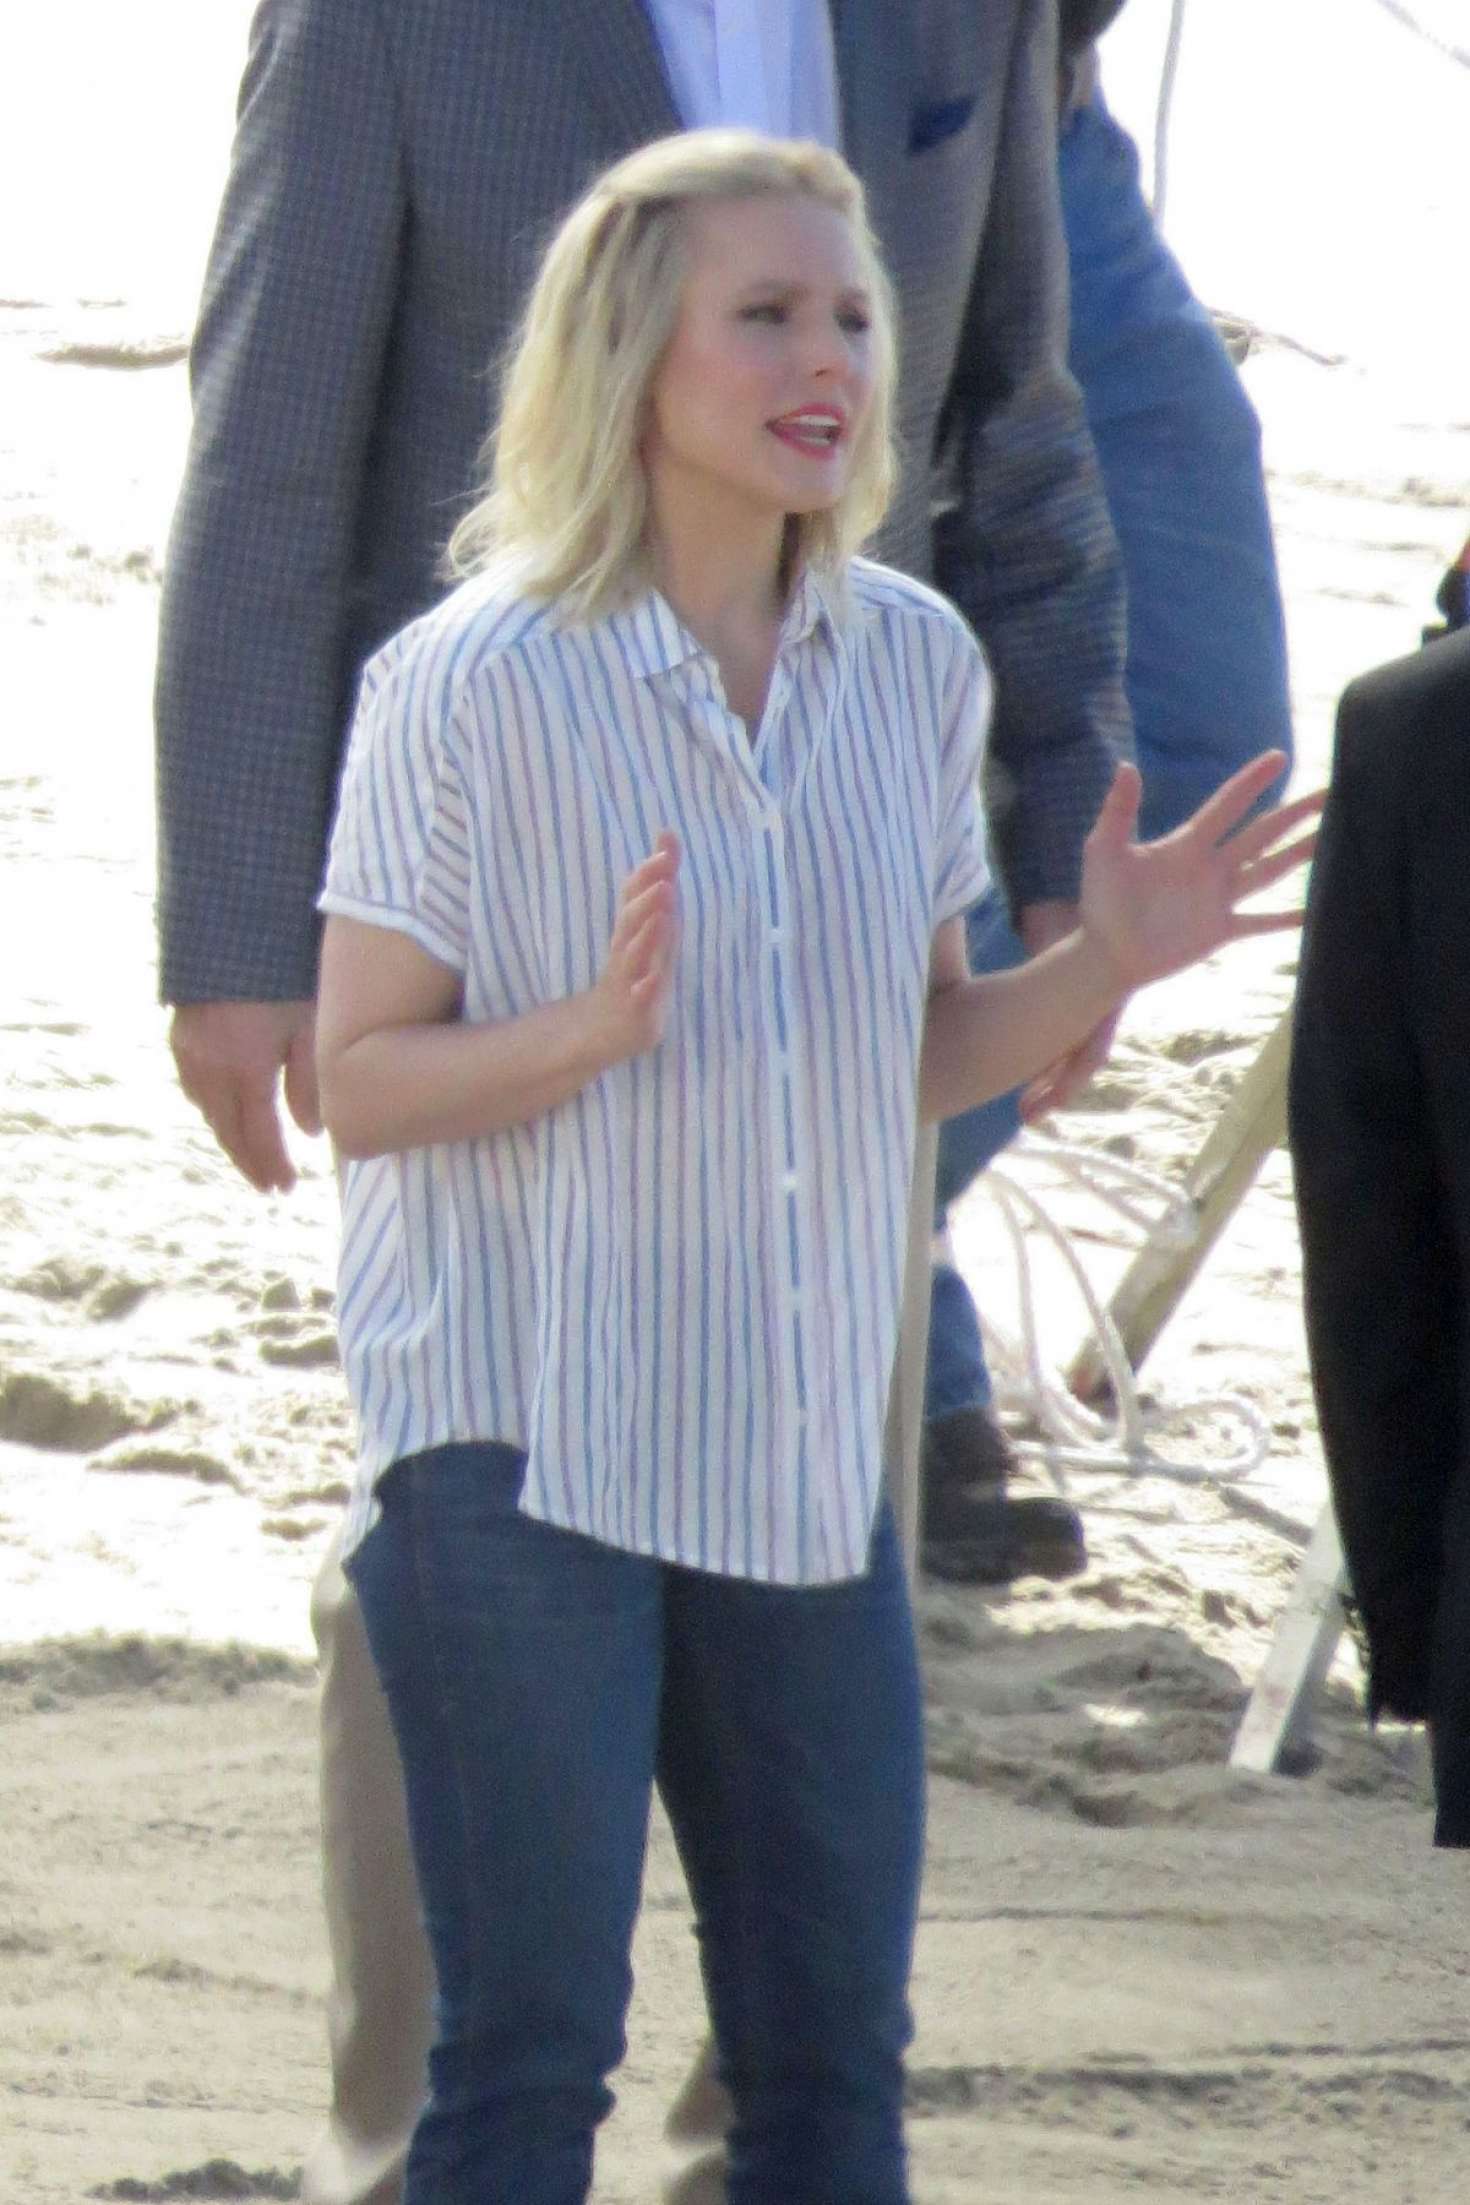 Kristen Bell on the set of 'The Good Place' in Malibu